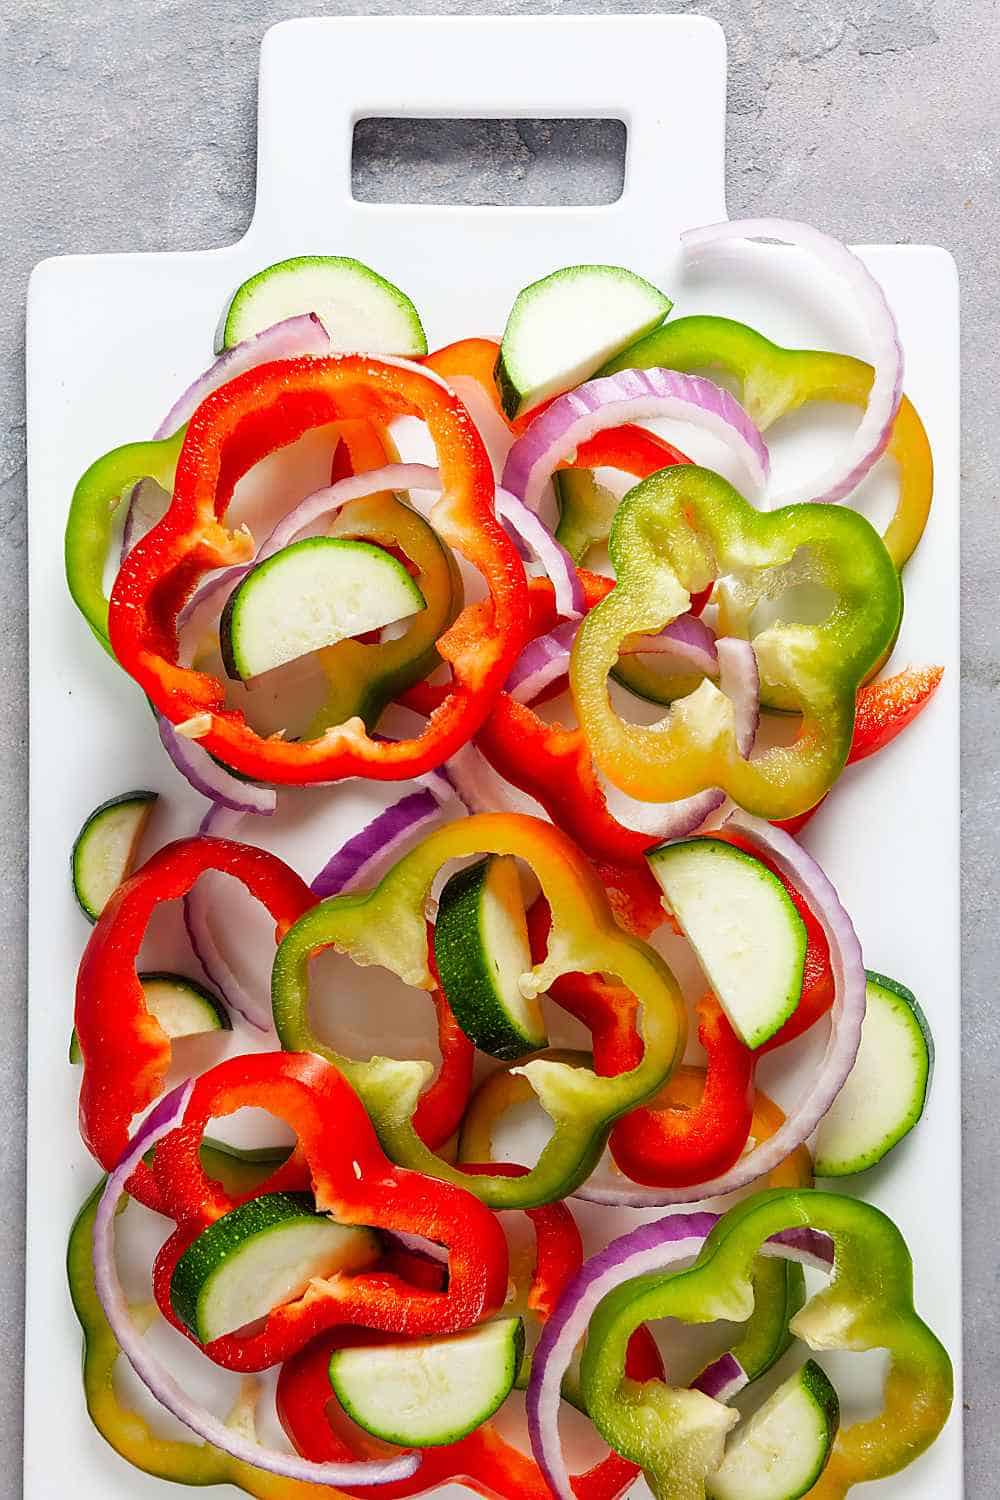 Sliced peppers, onion, and zucchini